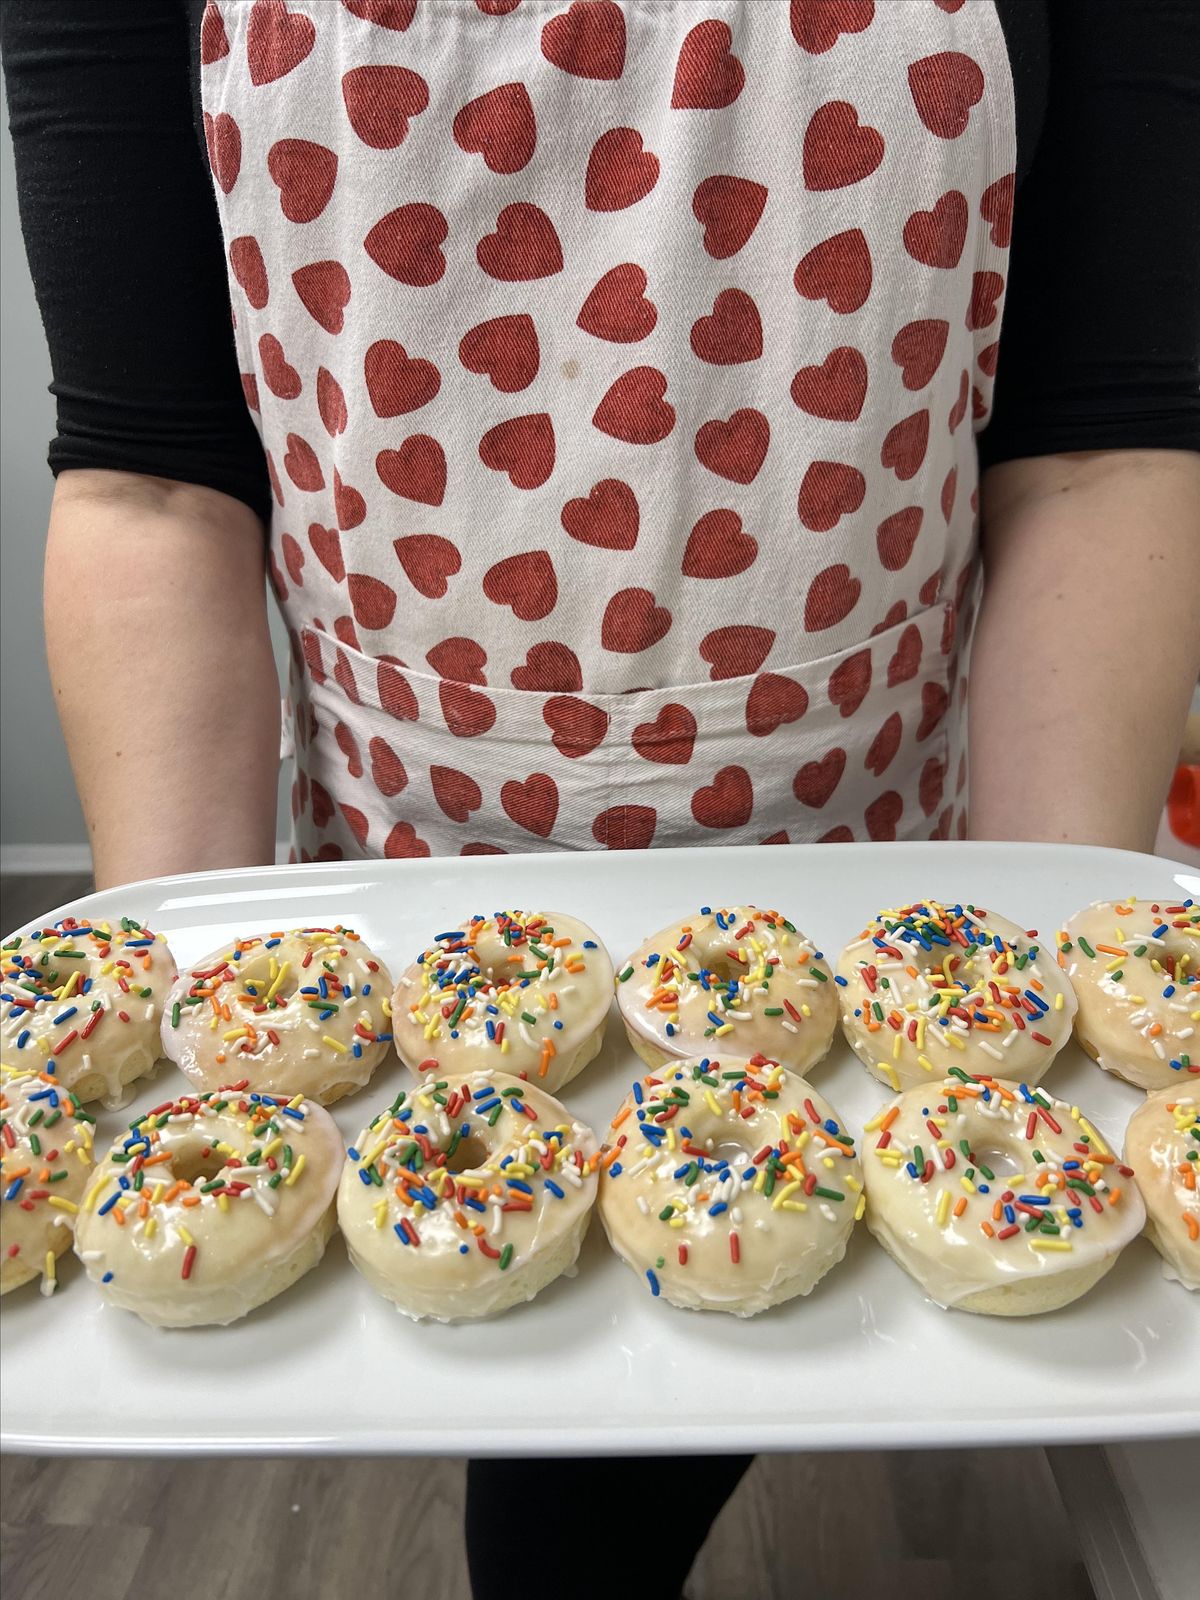 Annies Signature Sweets KIDS SUMMER BAKING CAMP July 10-12th- AGES 7-11